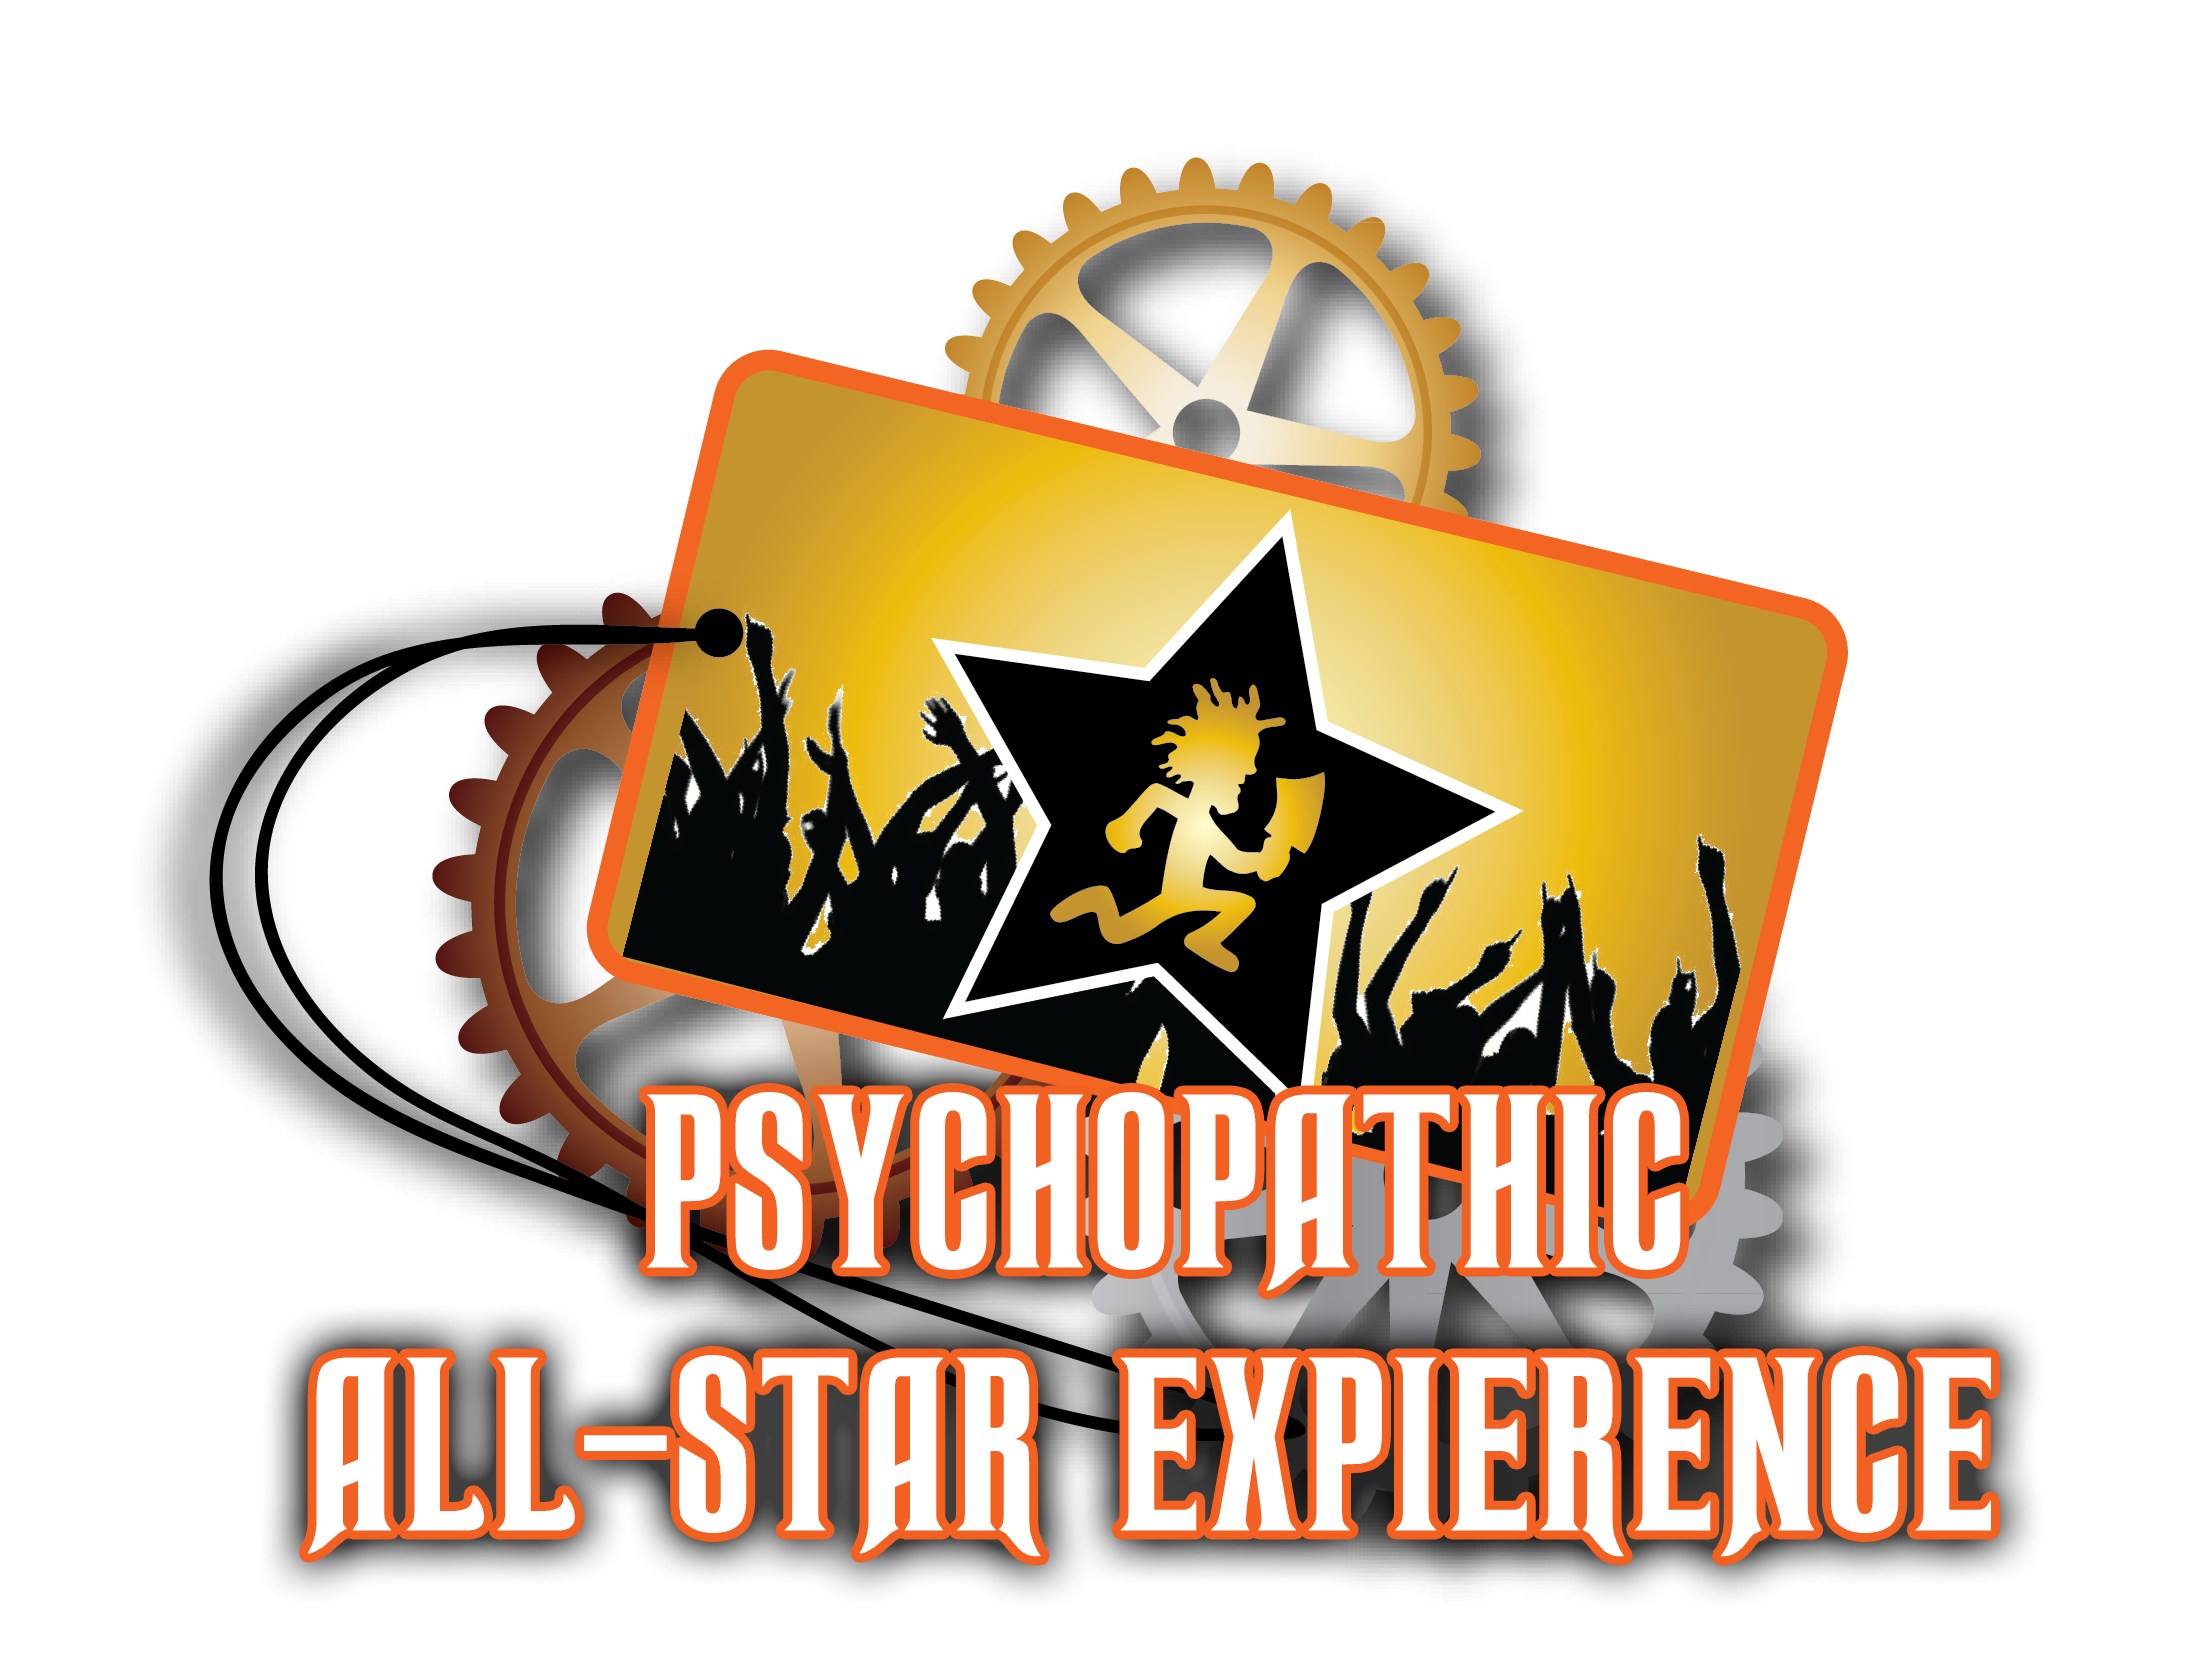 2015 Gathering Of The Juggalos Psychopathic All-Star Experience